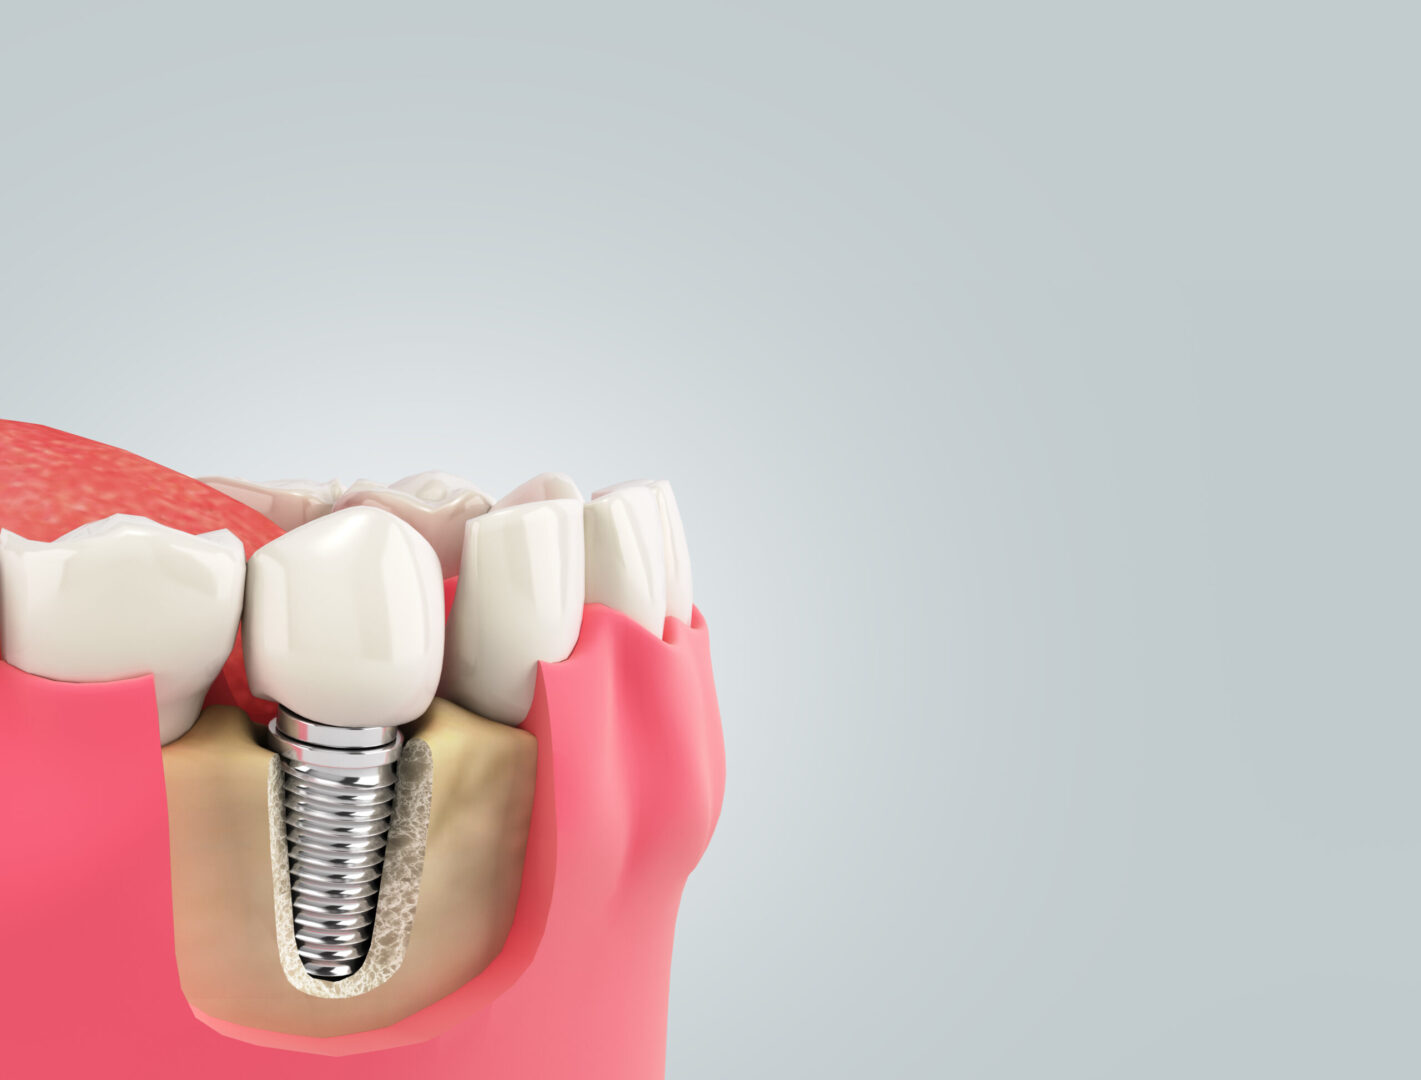 replace a tooth with a single dental implant at Aspire Surgical in Salt Lake City, UT